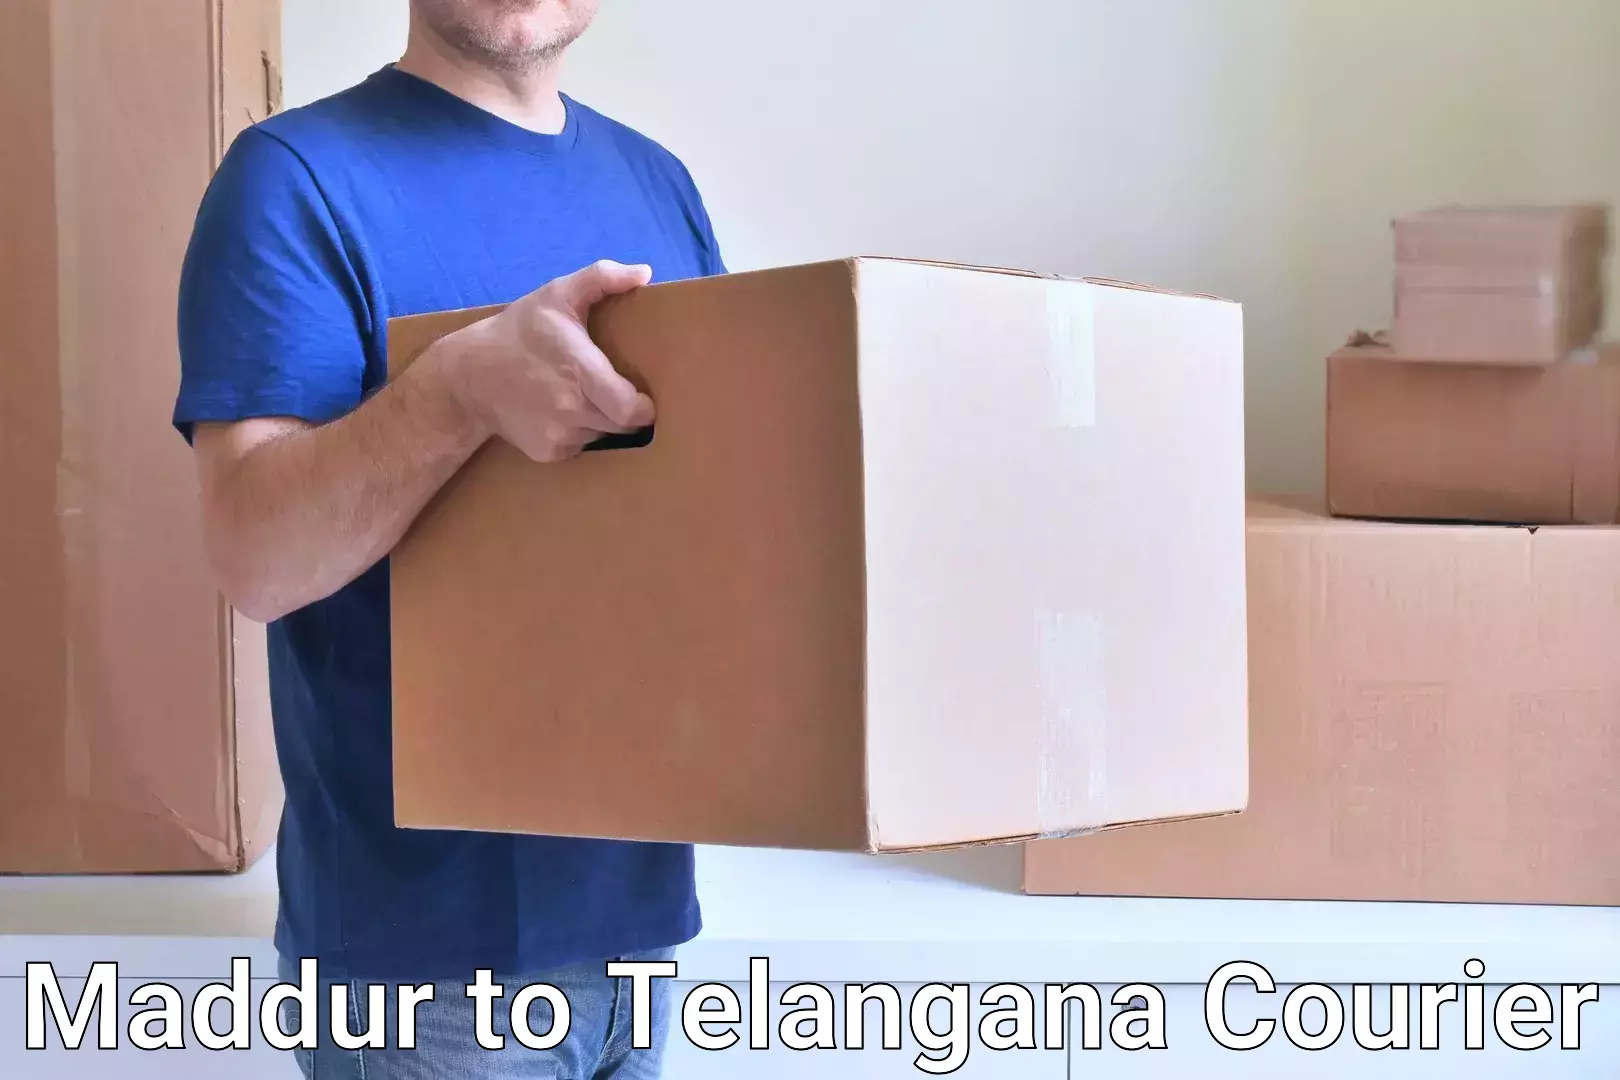 Pharmaceutical courier in Maddur to Kothur